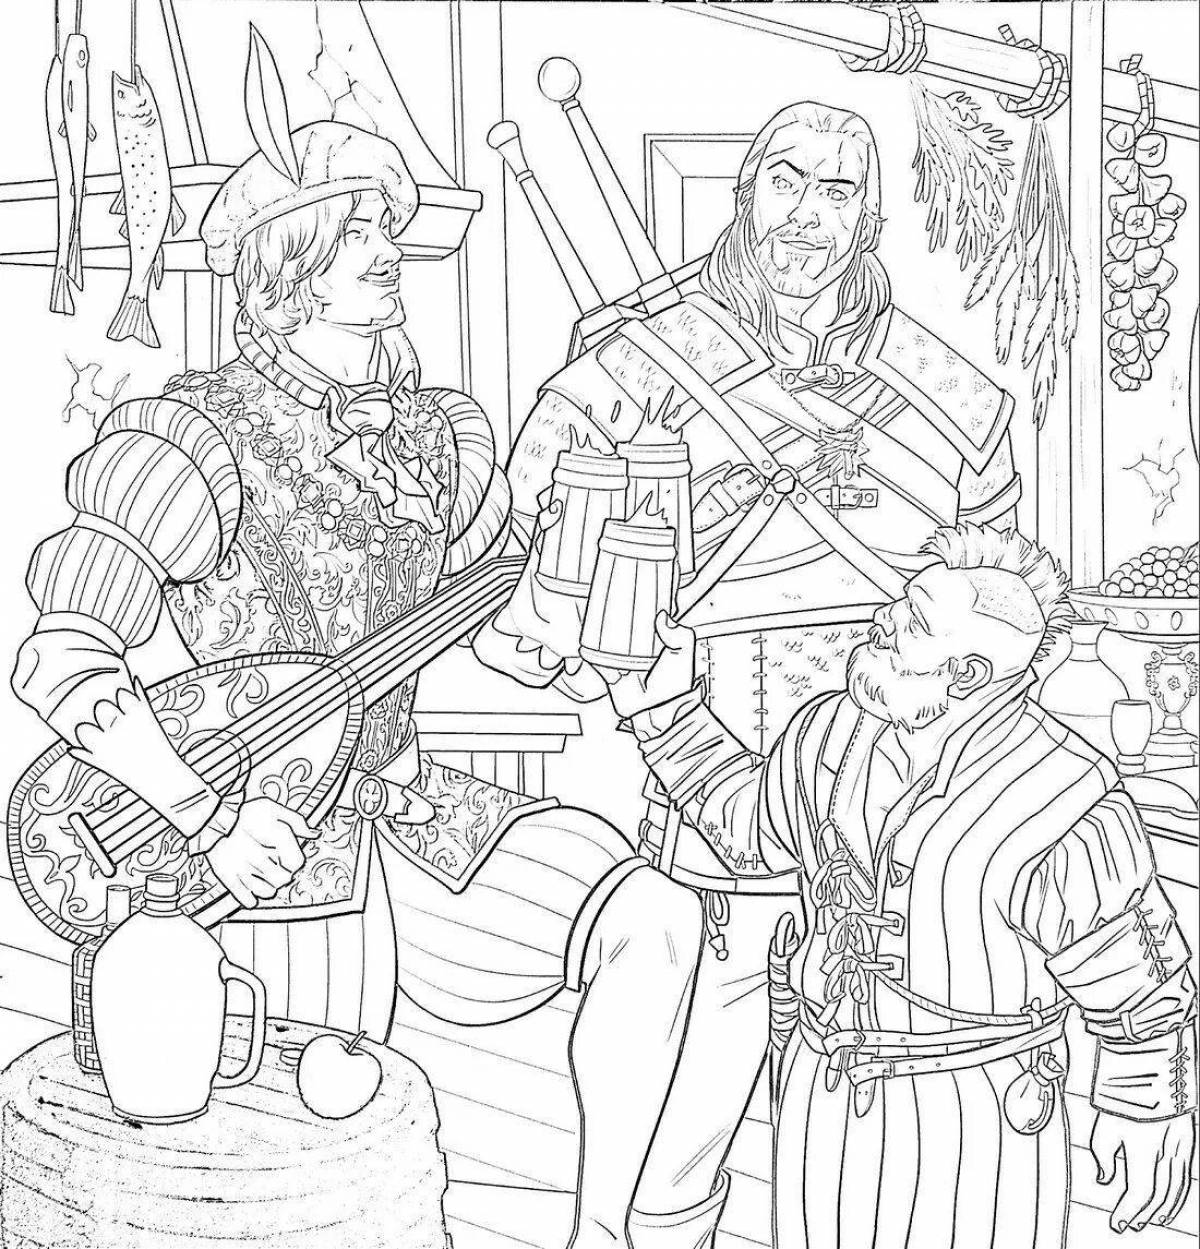 Bold Witcher 3 coloring book